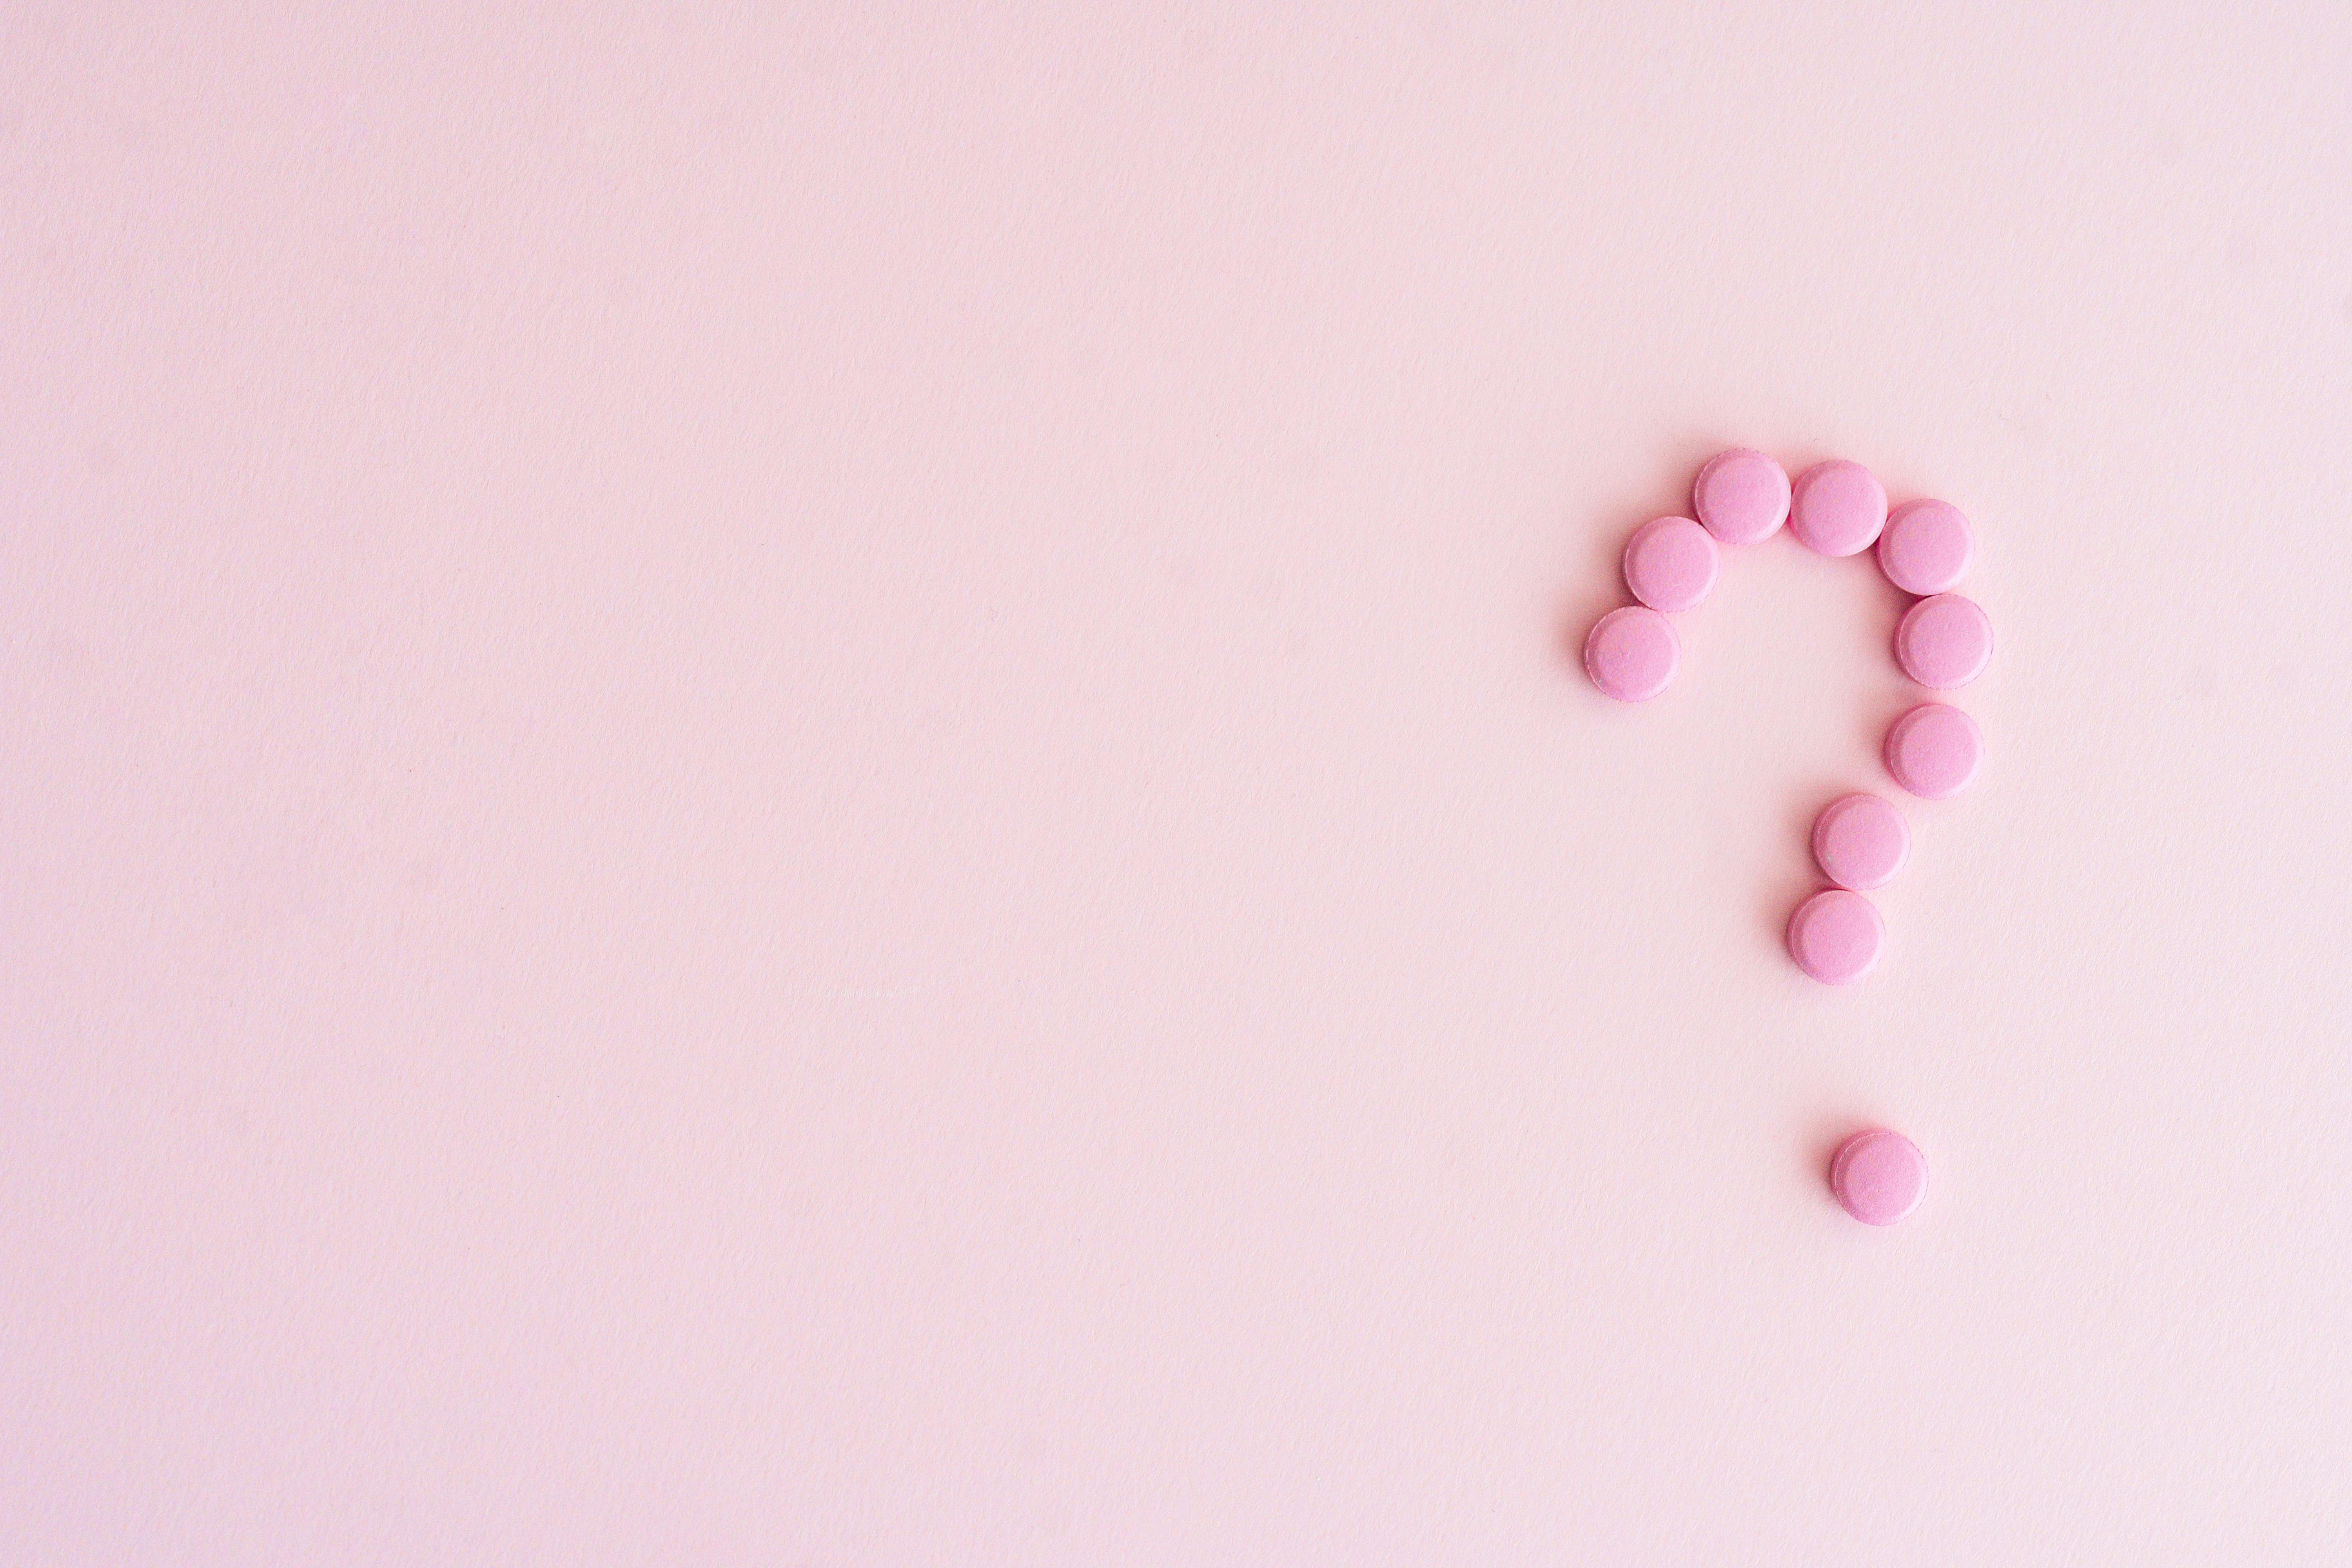 Pink Medicines Formed in Question Mark · Free Stock Photo